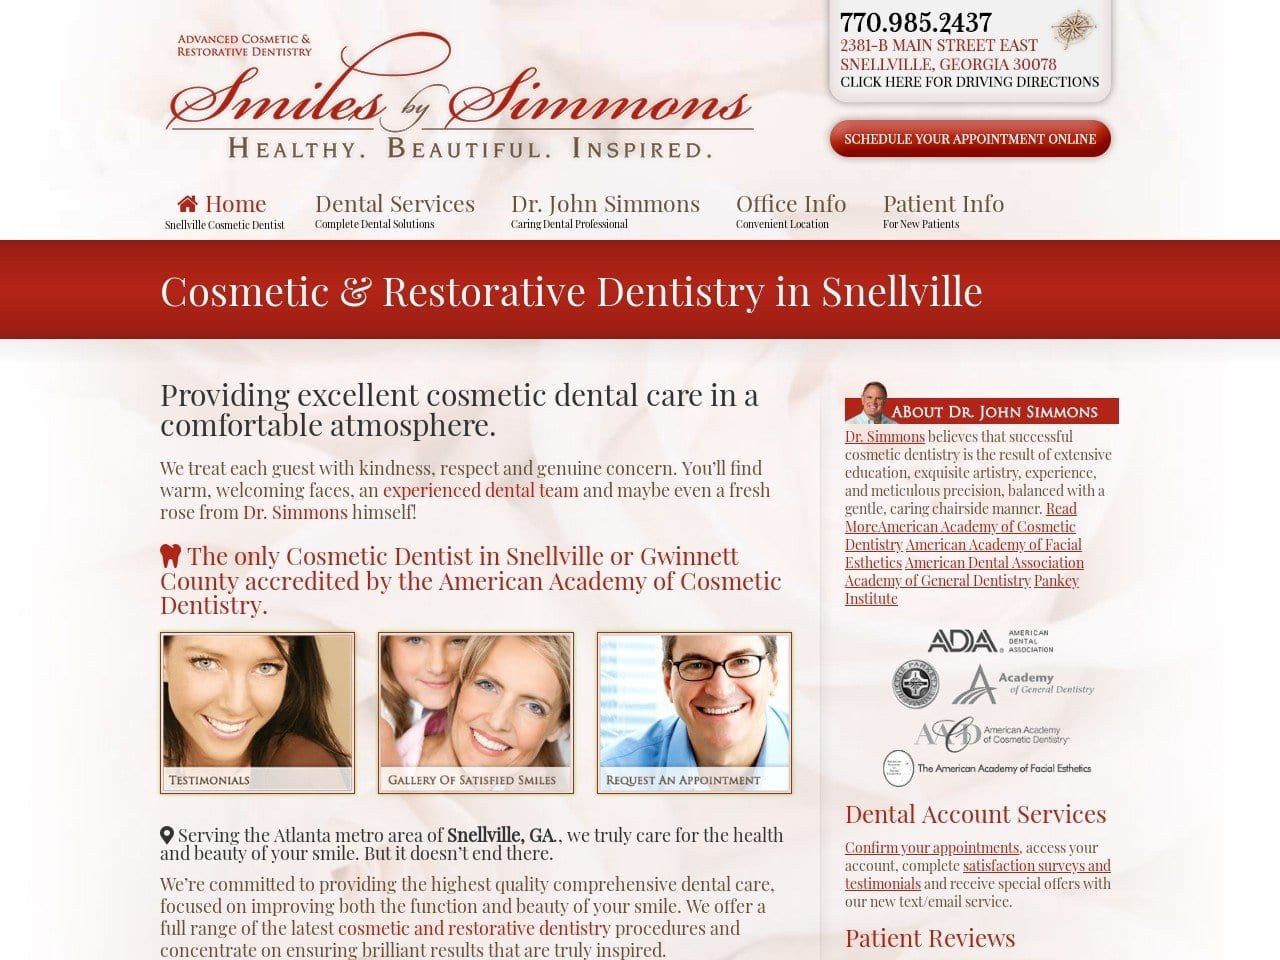 Smiles by Simmons Website Screenshot from smilesbysimmons.com